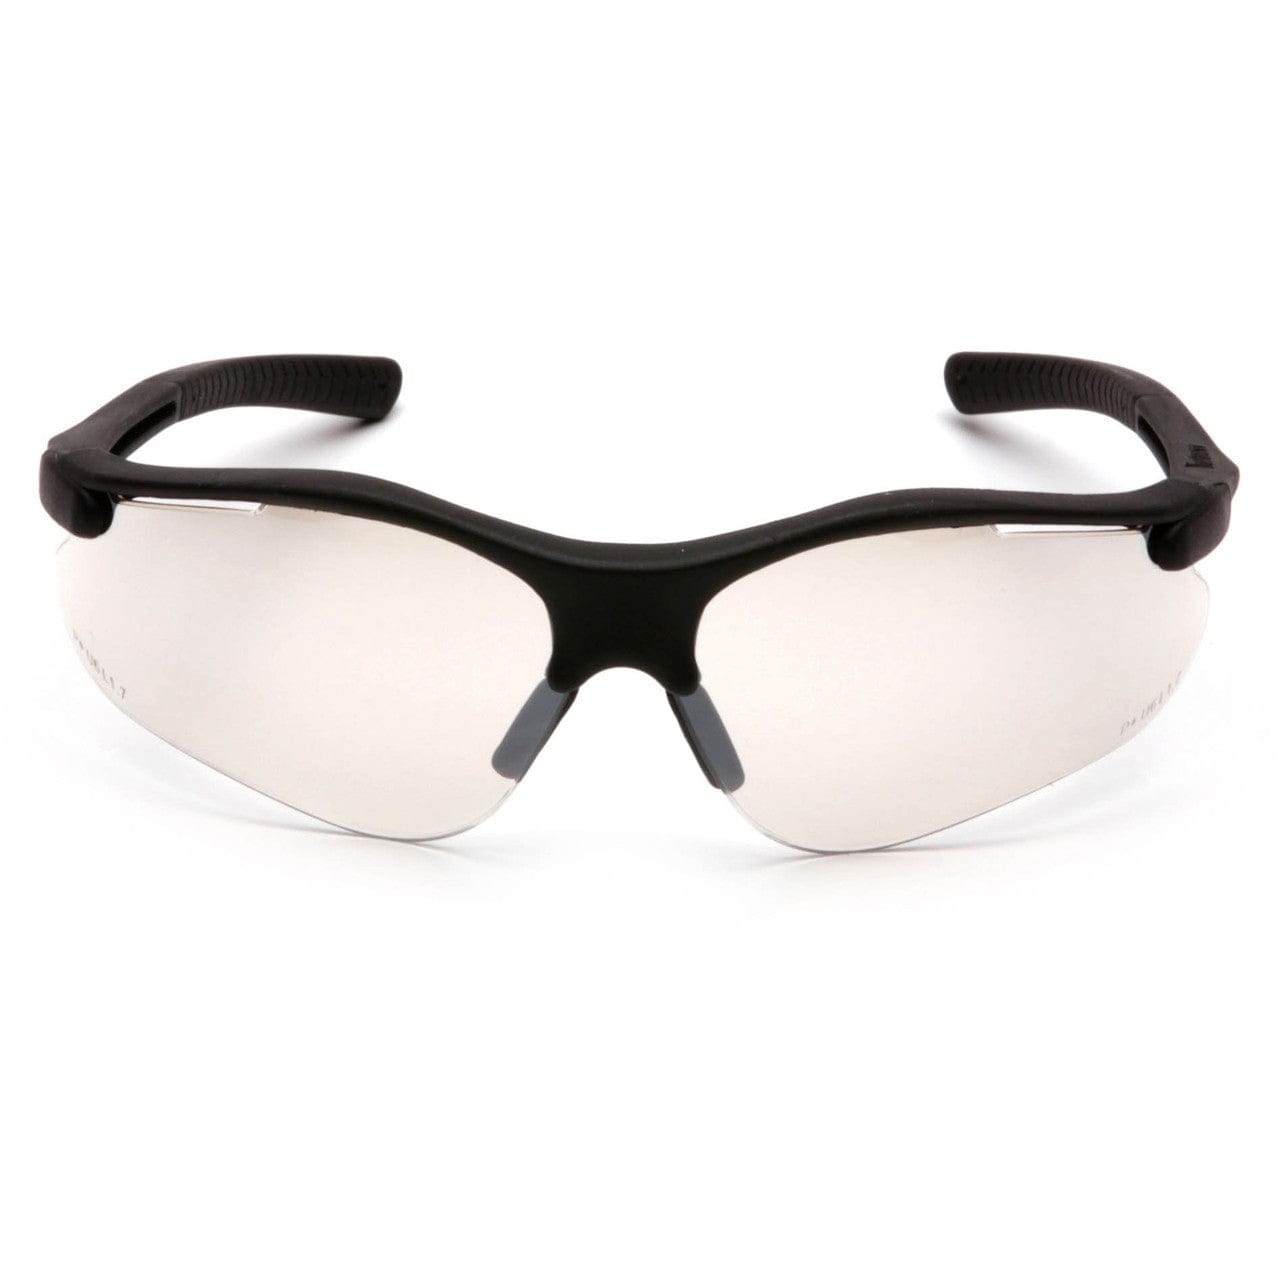 Pyramex Fortress Safety Glasses with Black Frame and Indoor/Outdoor Lens SB3780D Front View